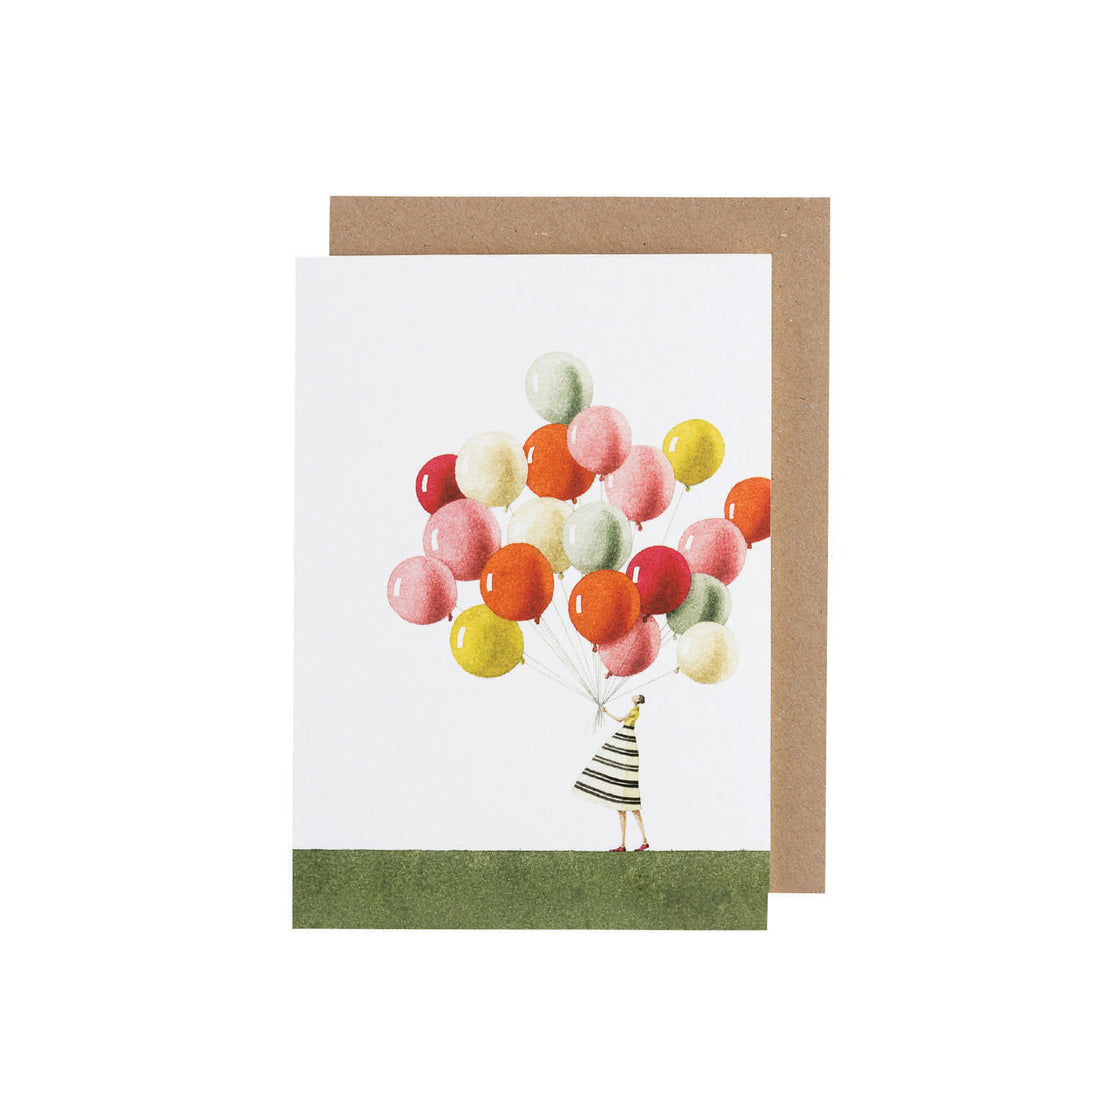 An environmentally sustainable Hester &amp; Cook Balloons Card, Set of 10, featuring a girl holding balloons.